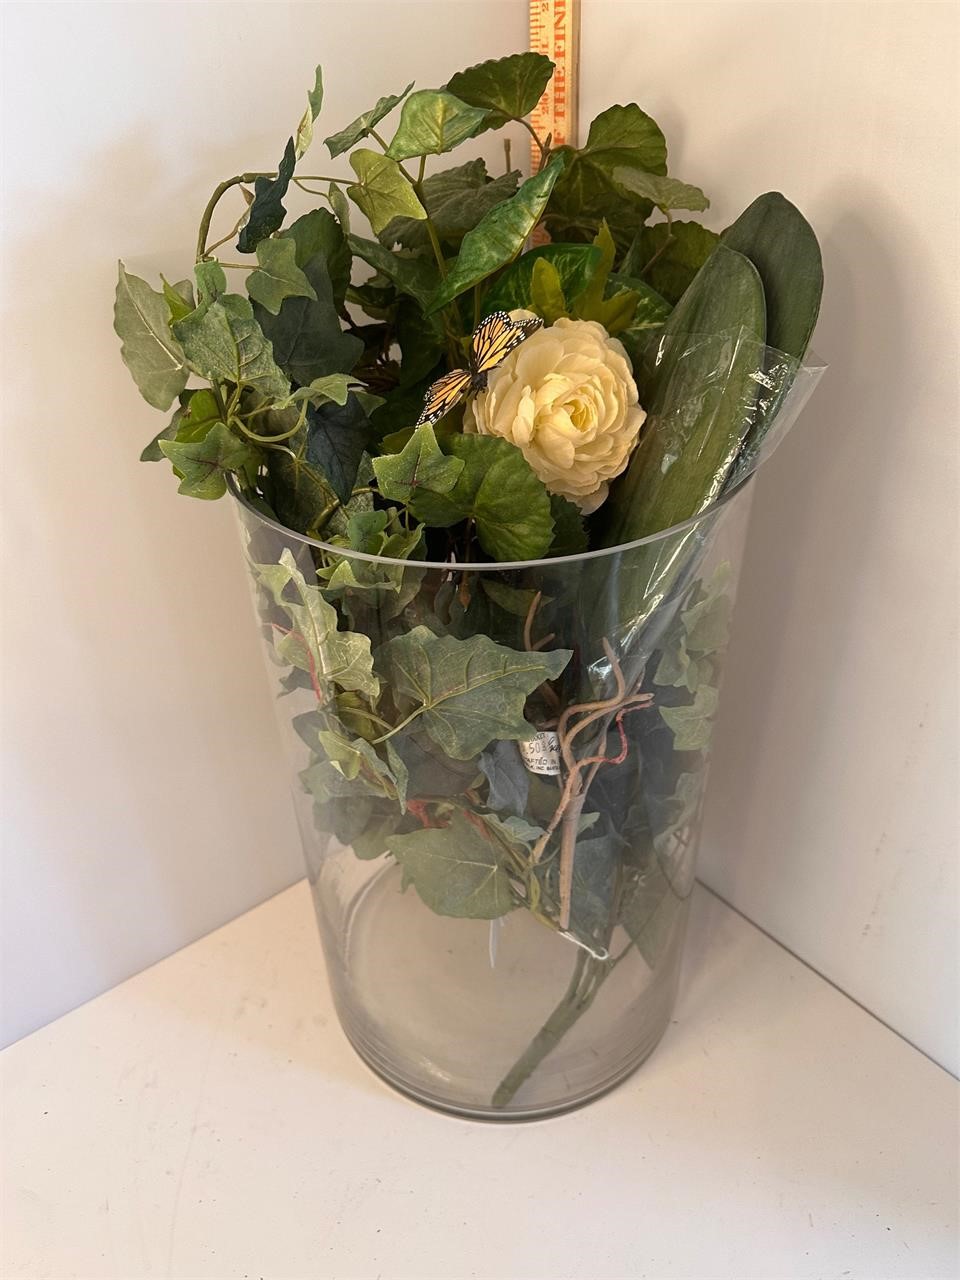 Large glass vase with greenery